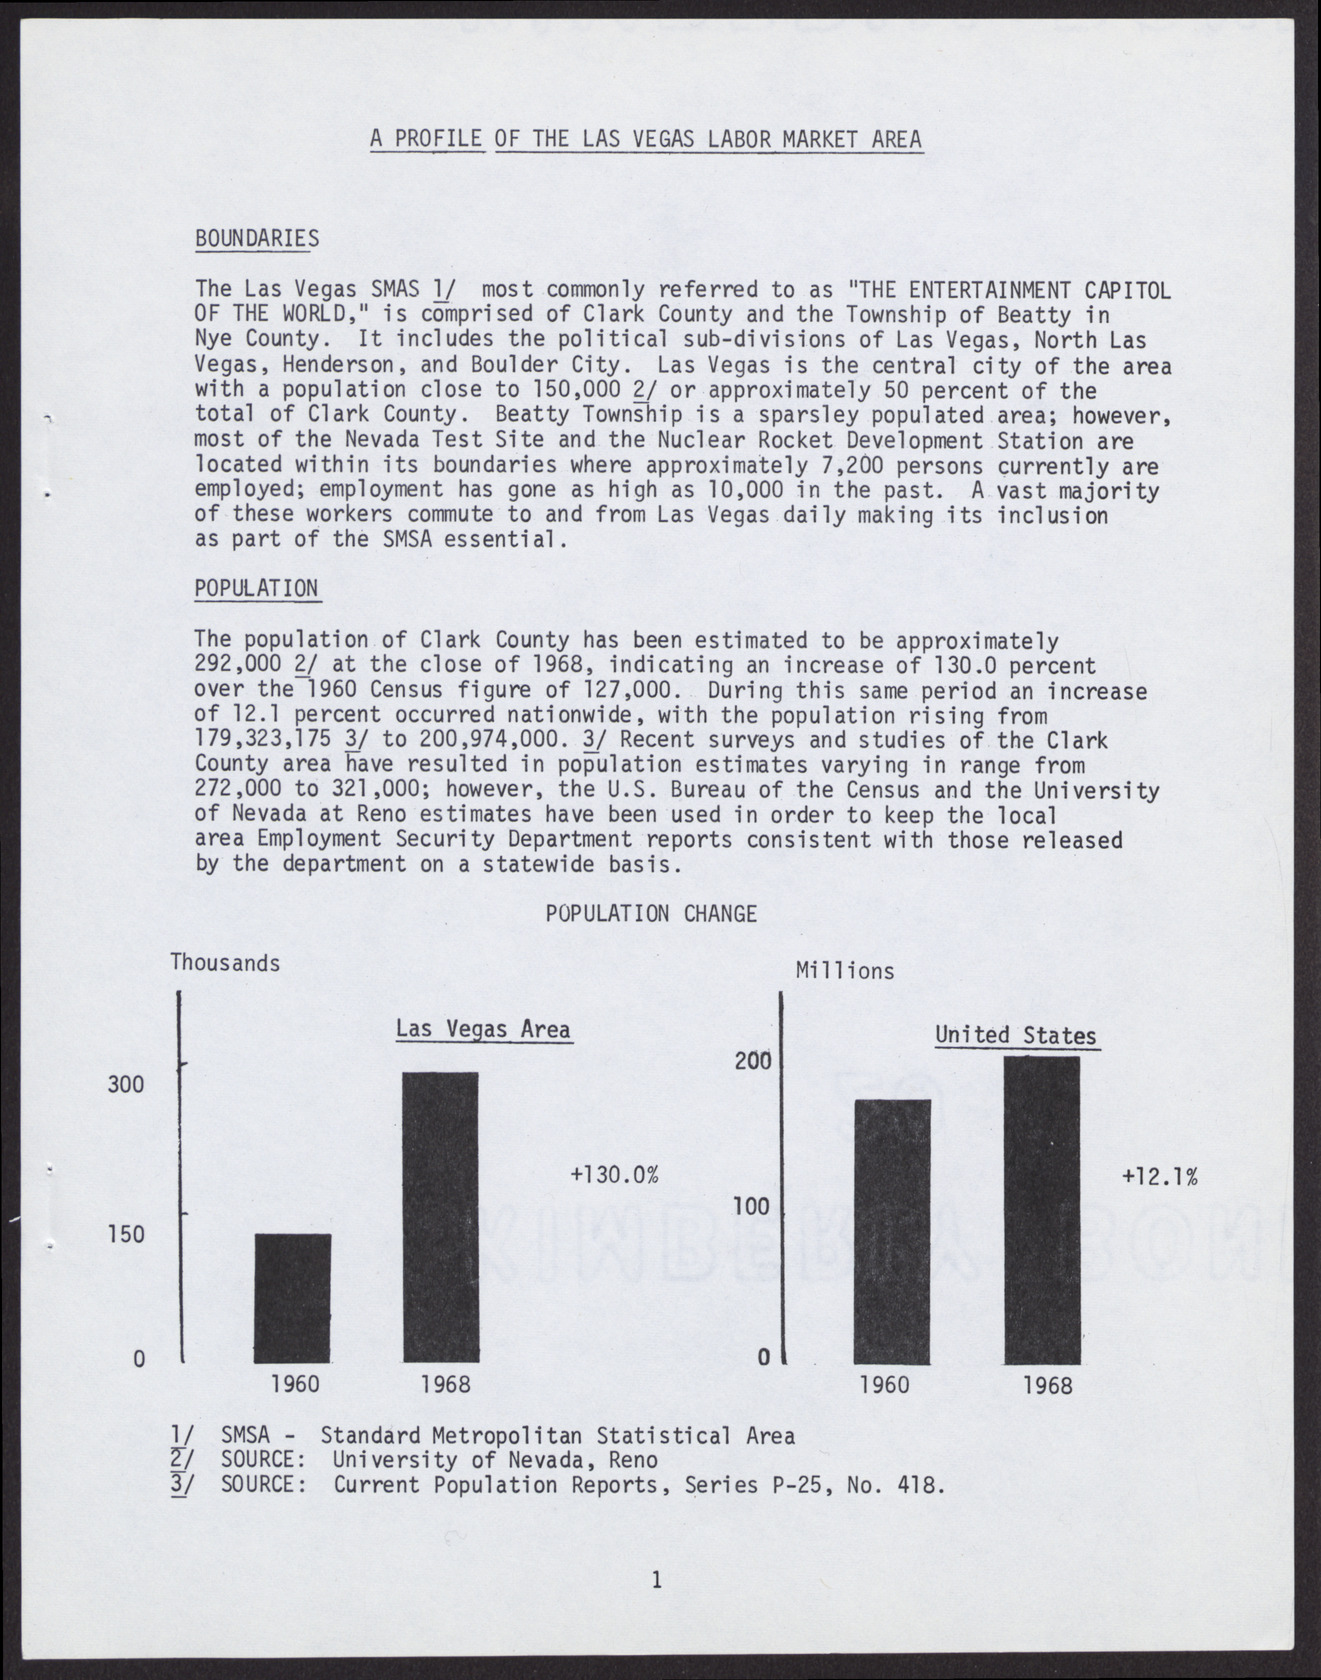 Semi-annual Area Manpower Review (16 pages), Fall 1969, page 4